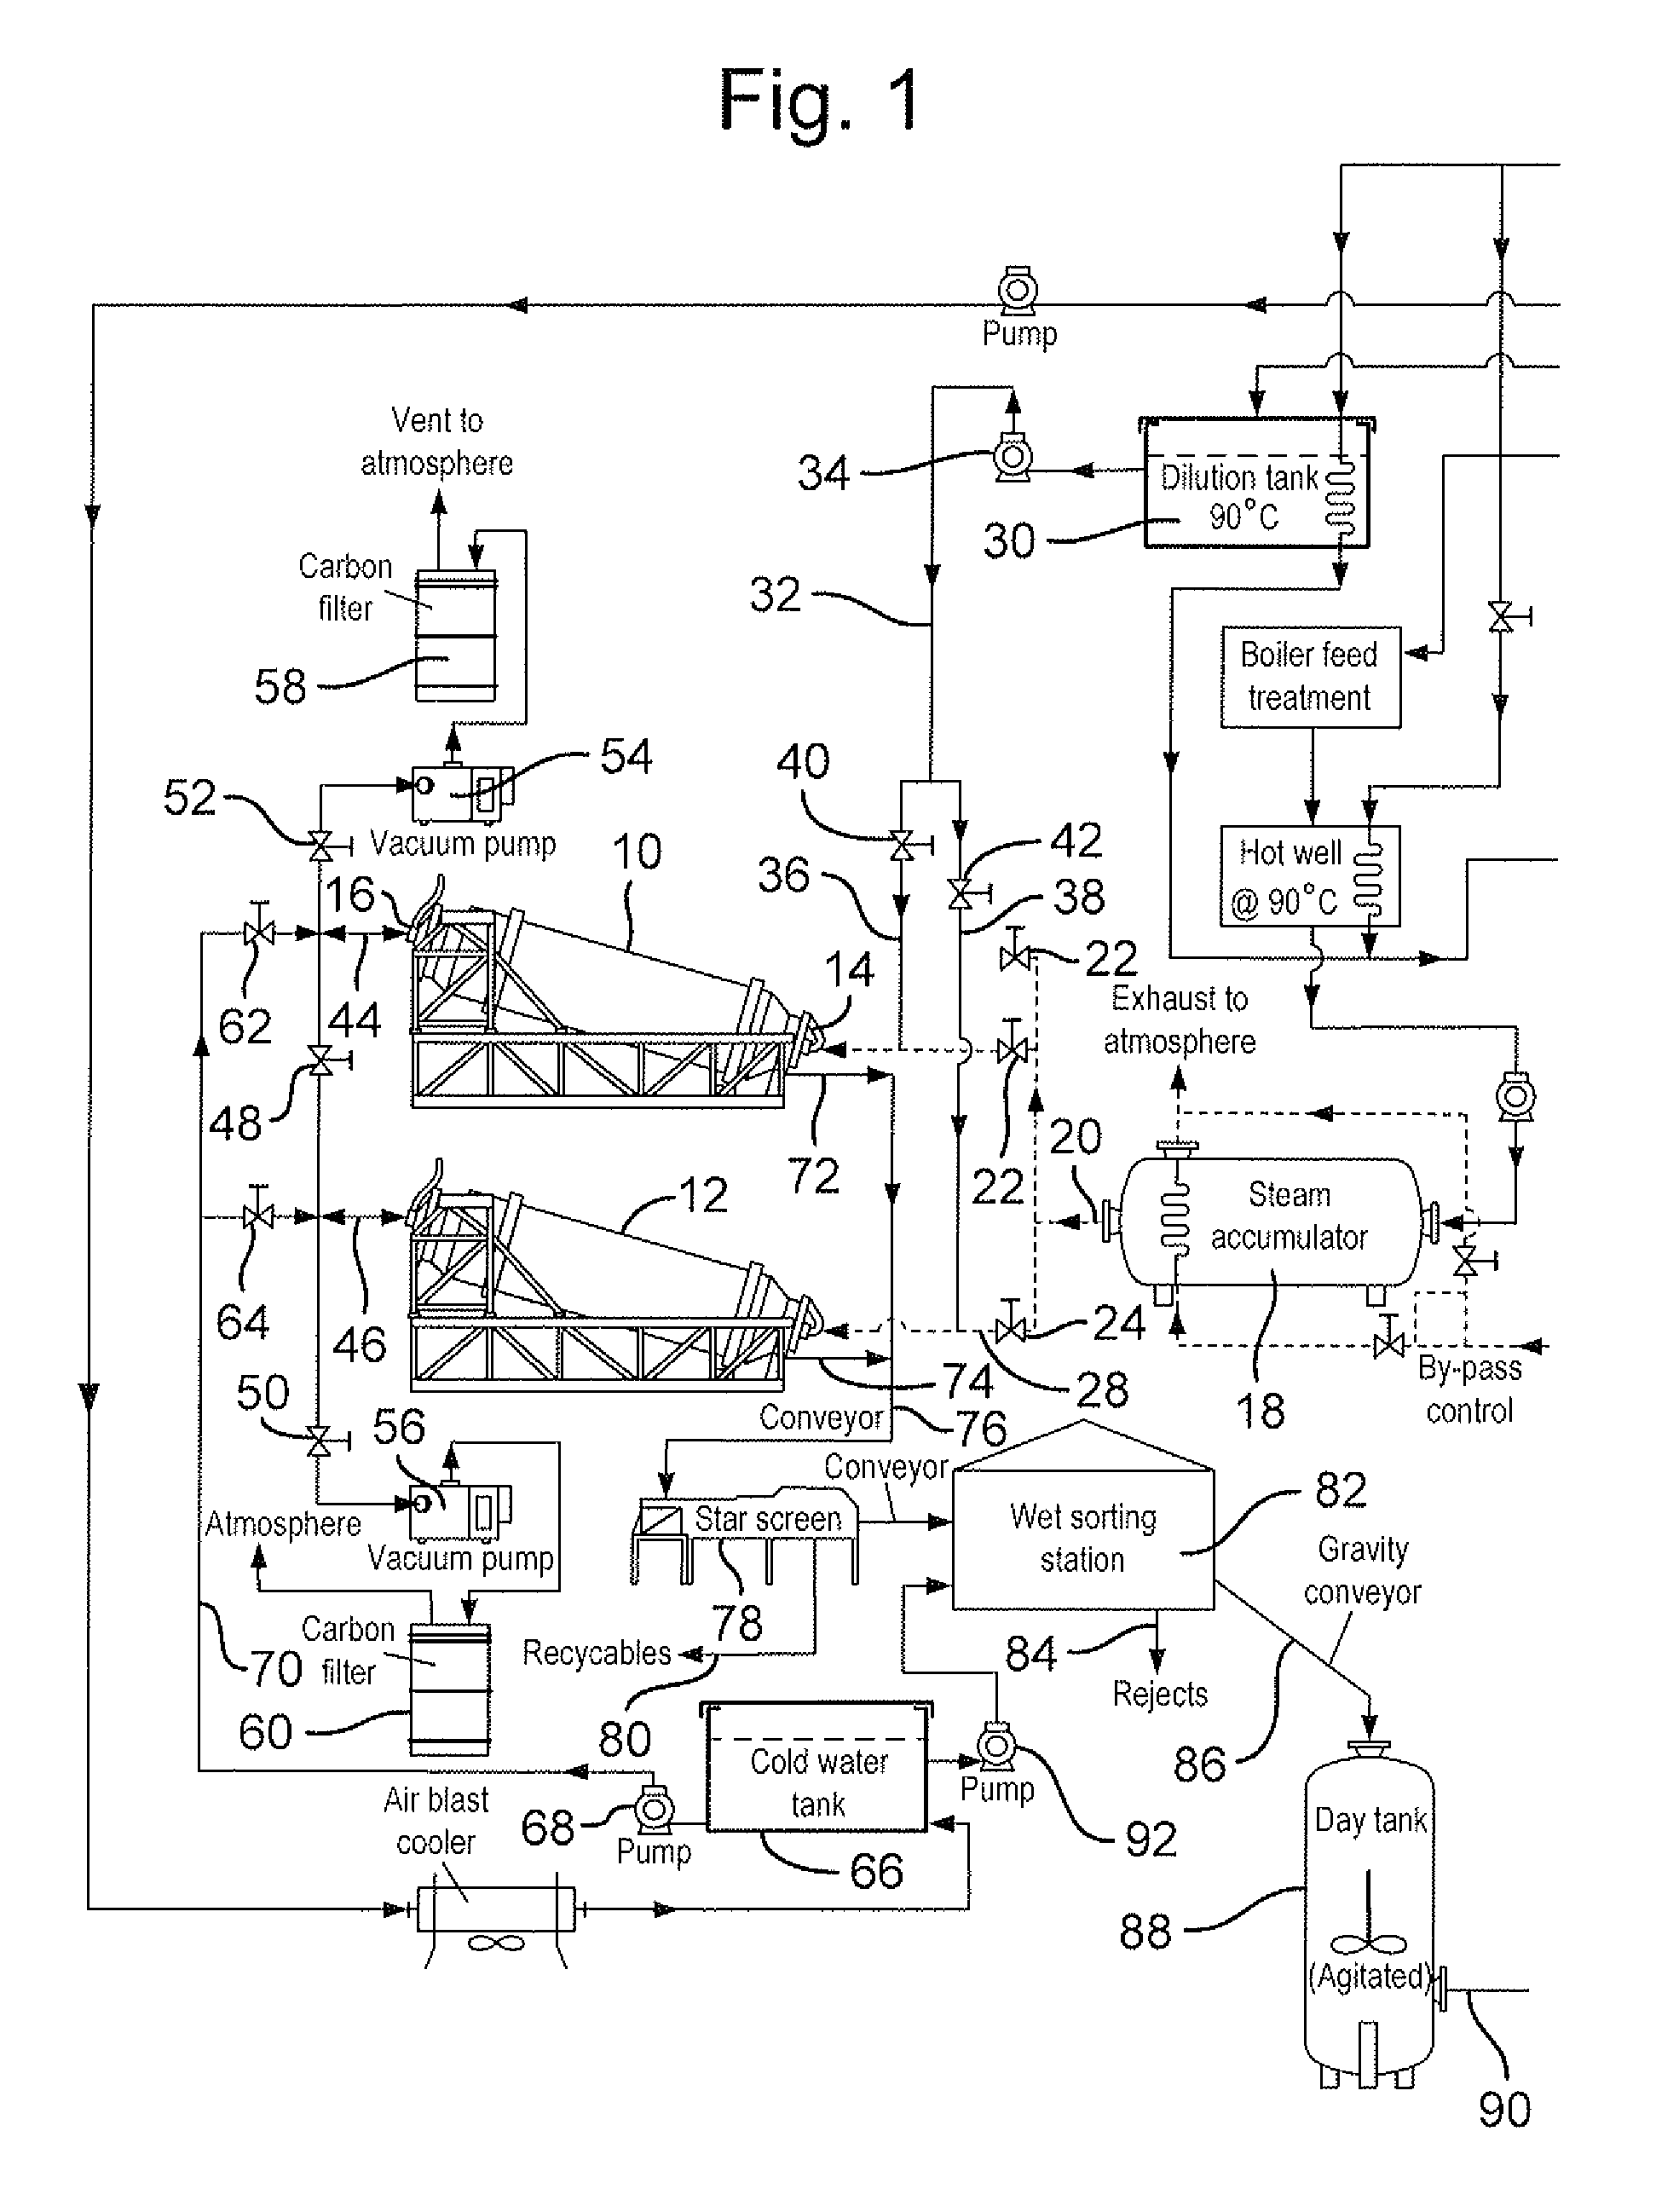 Apparatus and process for treating waste